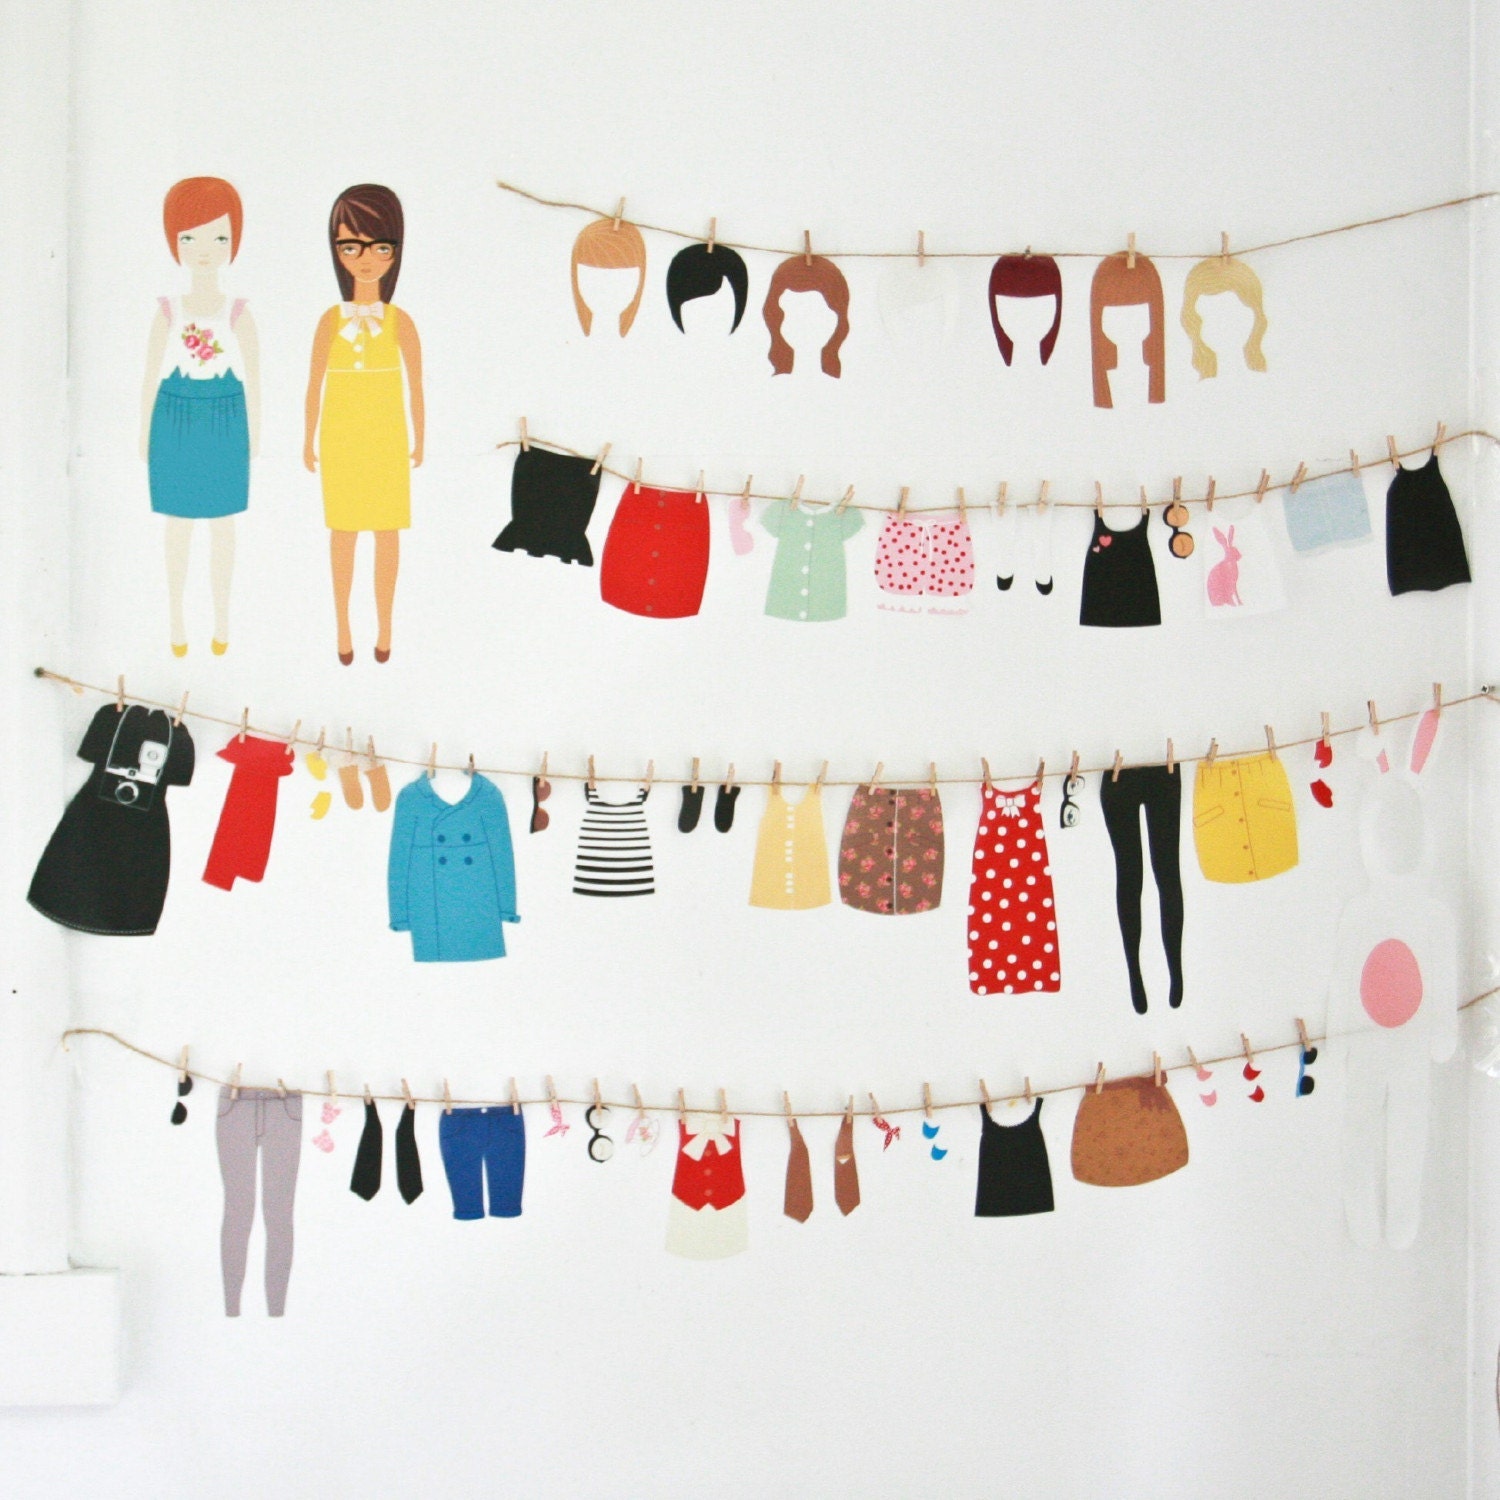 Dress up Dolls - wall stickers, removable decals